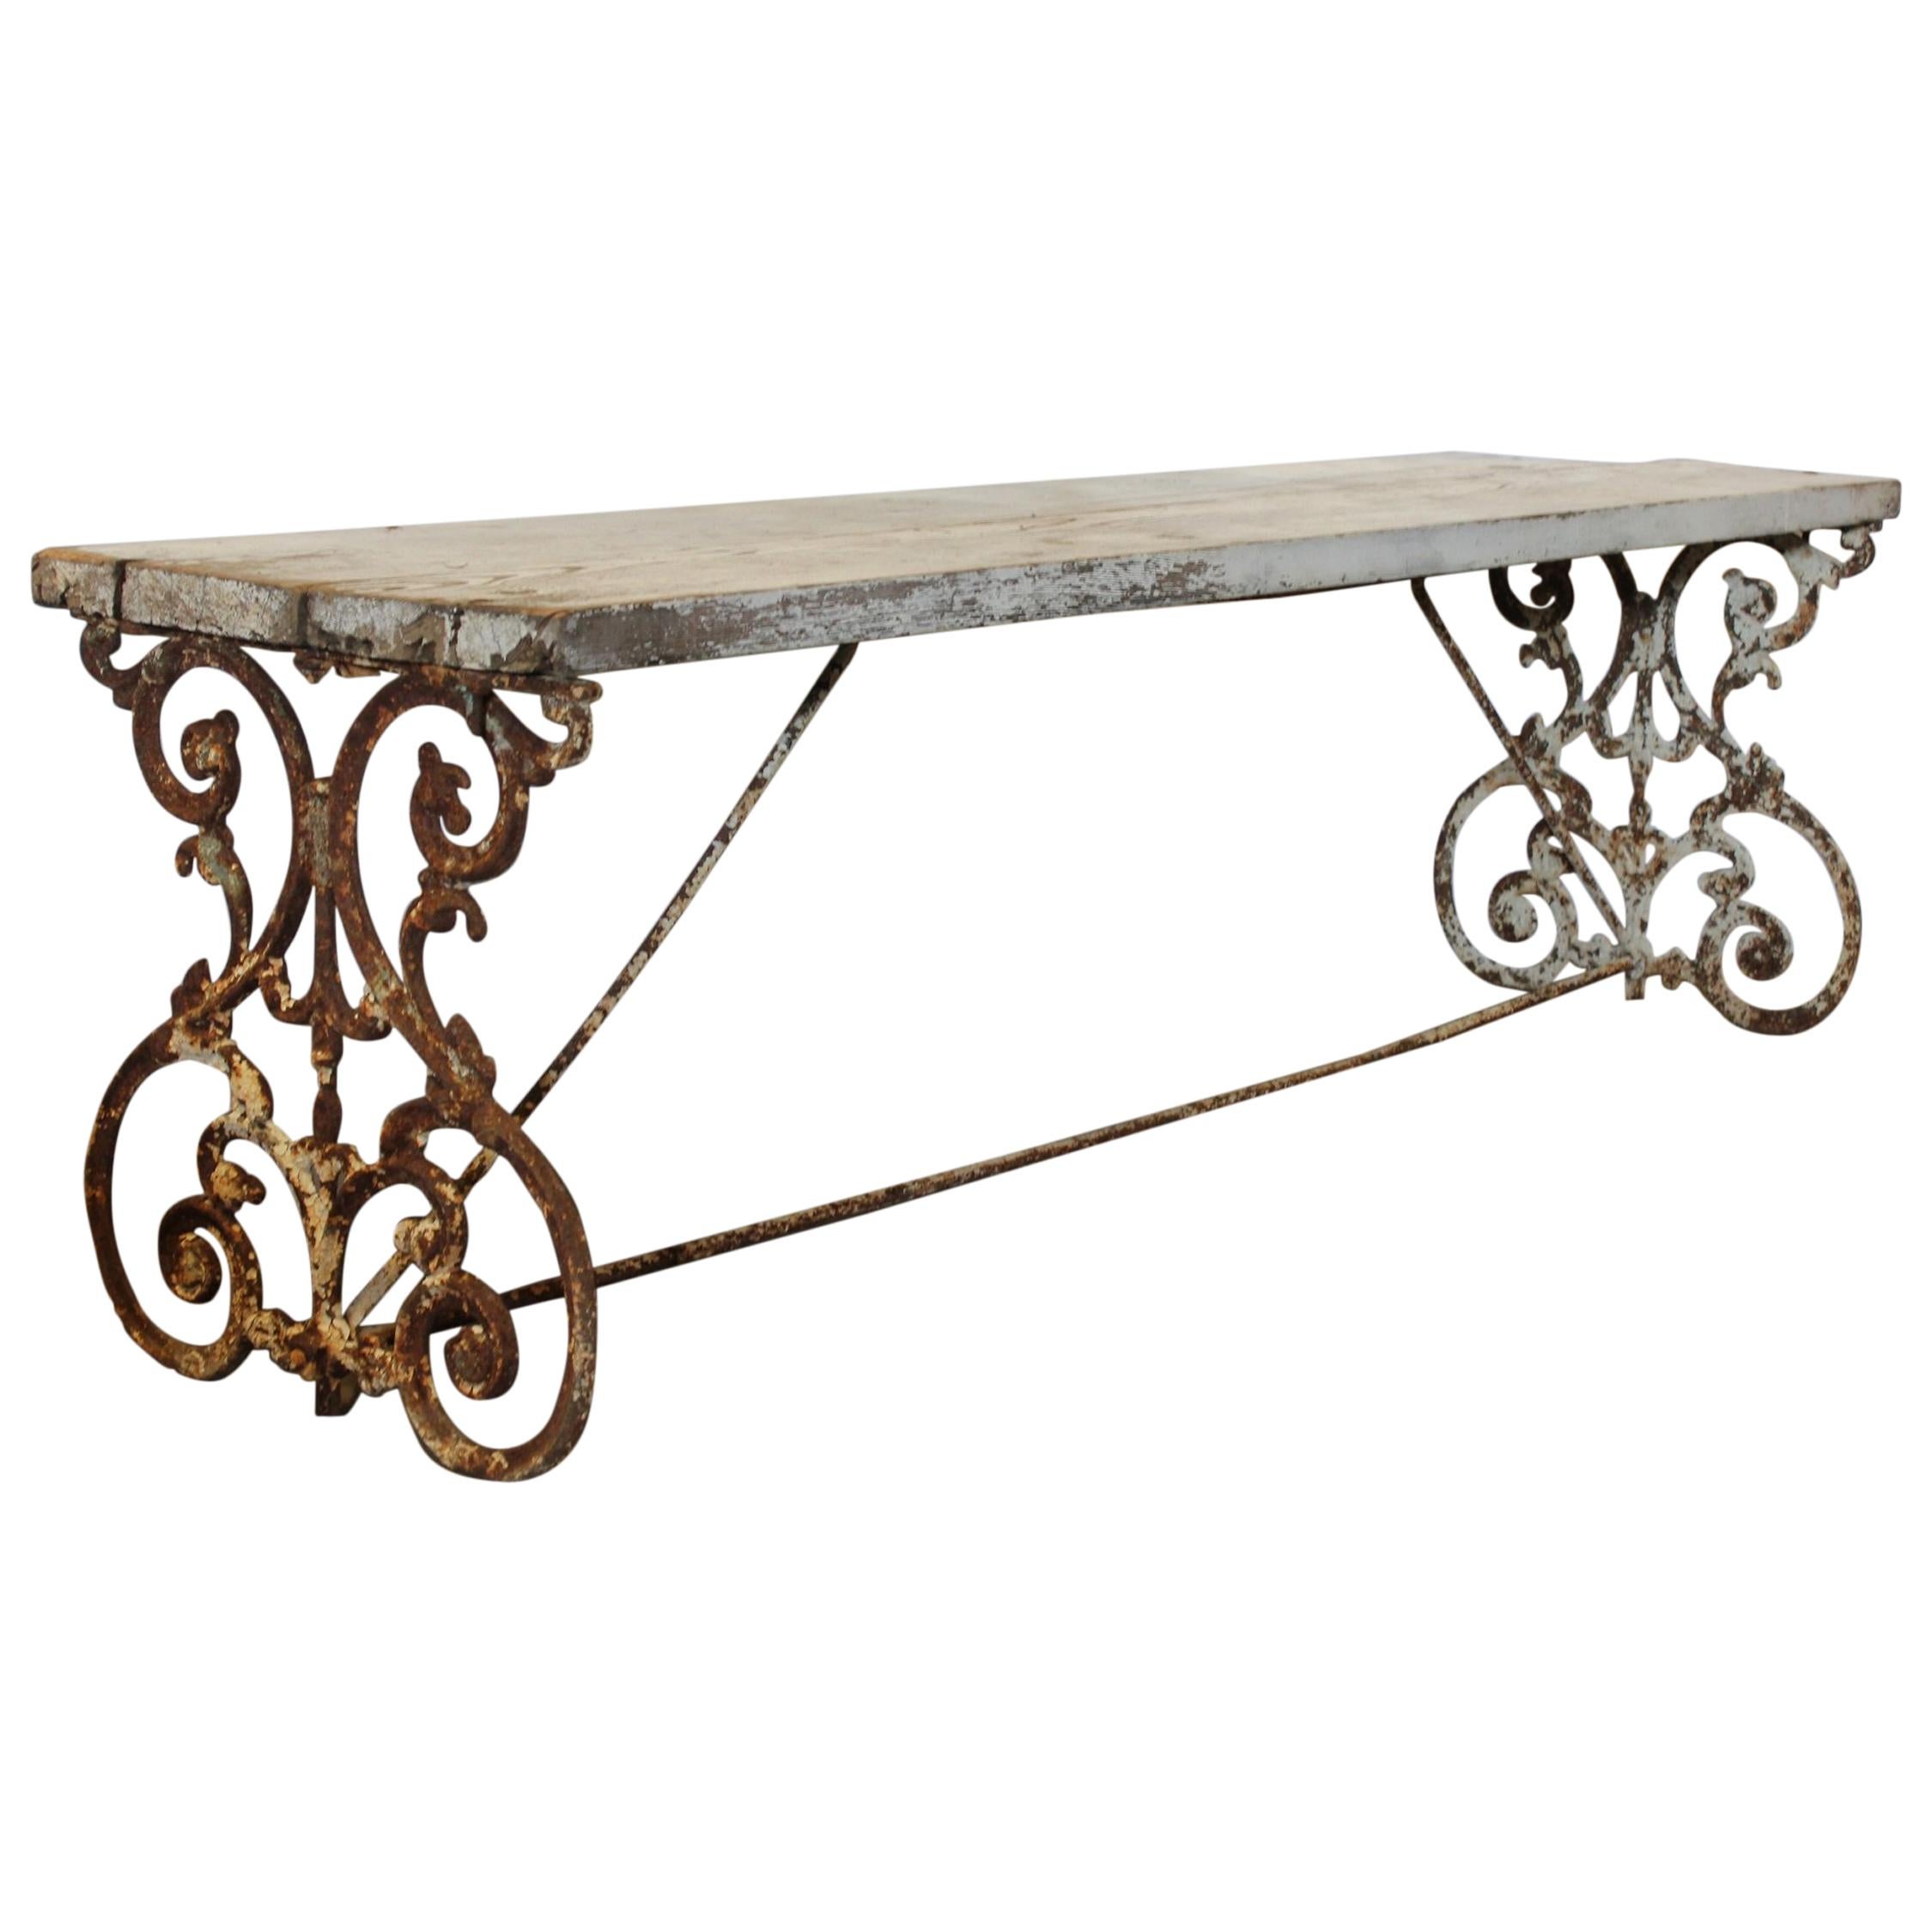 American Wrought Iron and Wood Base Dining Table or Bench, circa 1900s For Sale